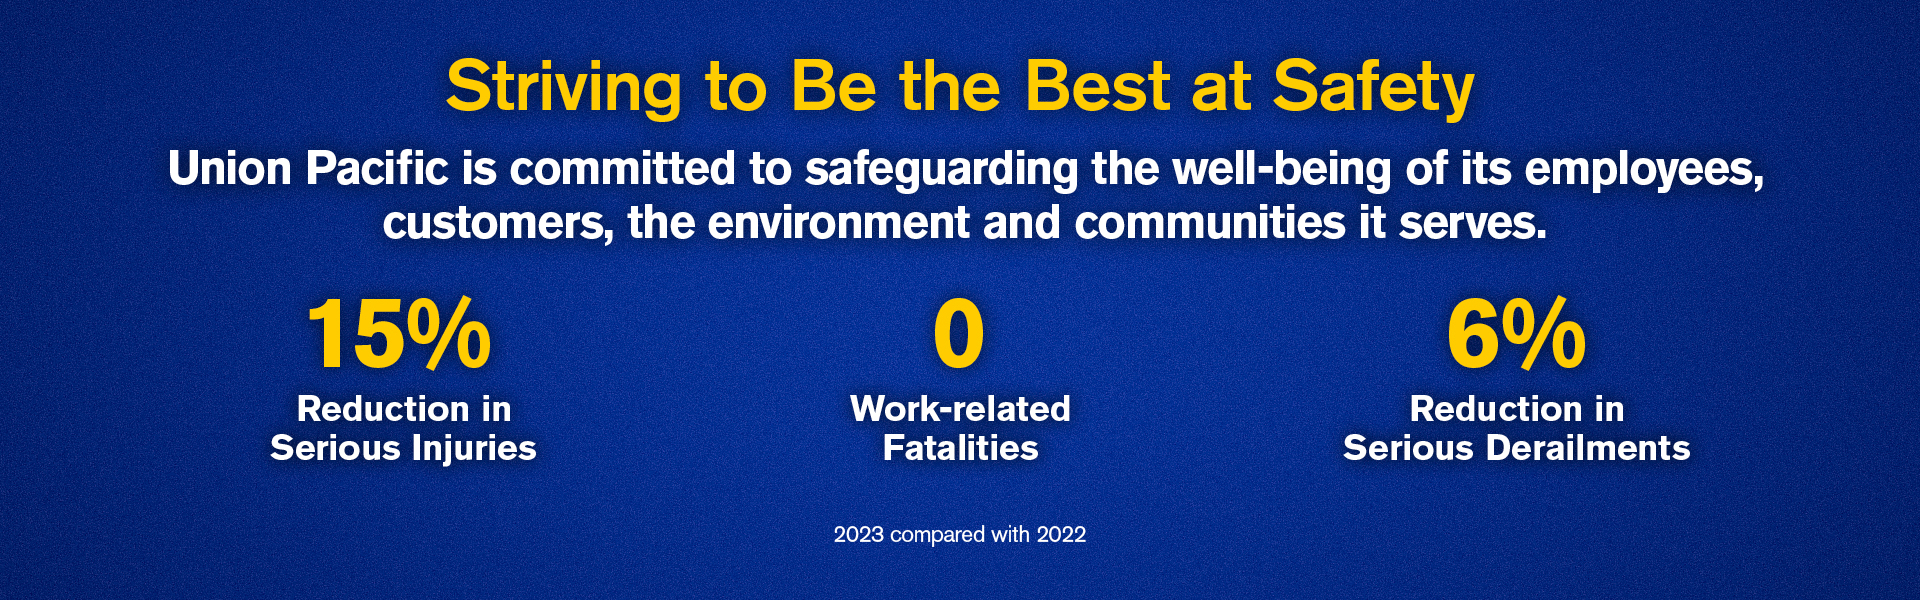 Committed to Safeguarding our employees, customers and communities